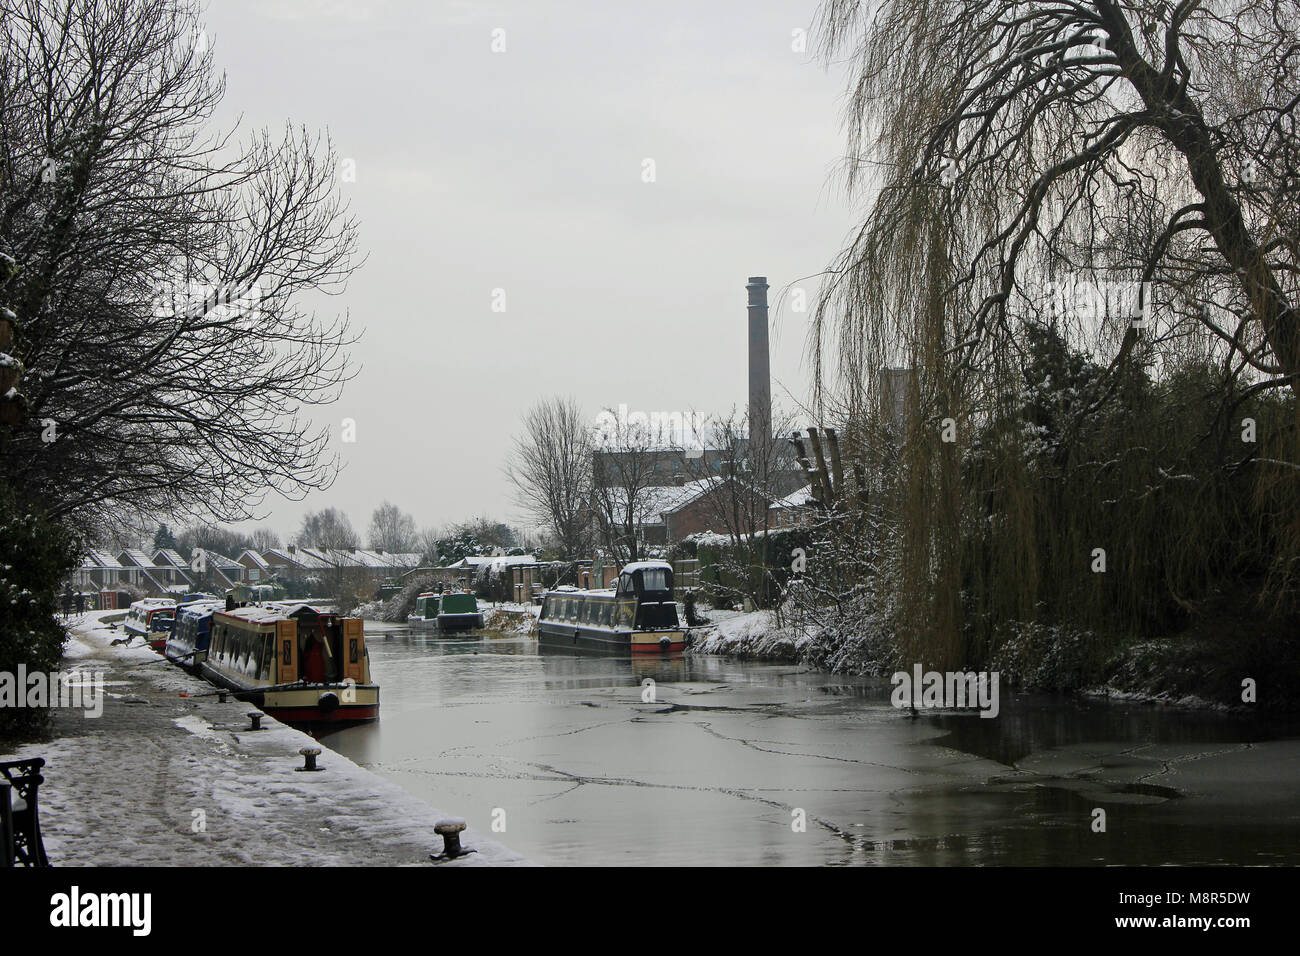 The Leeds and Liverpool canal in the Burscough has frozen over and there has been a light snow shower to give a bit more winteriness to the scene. Stock Photo